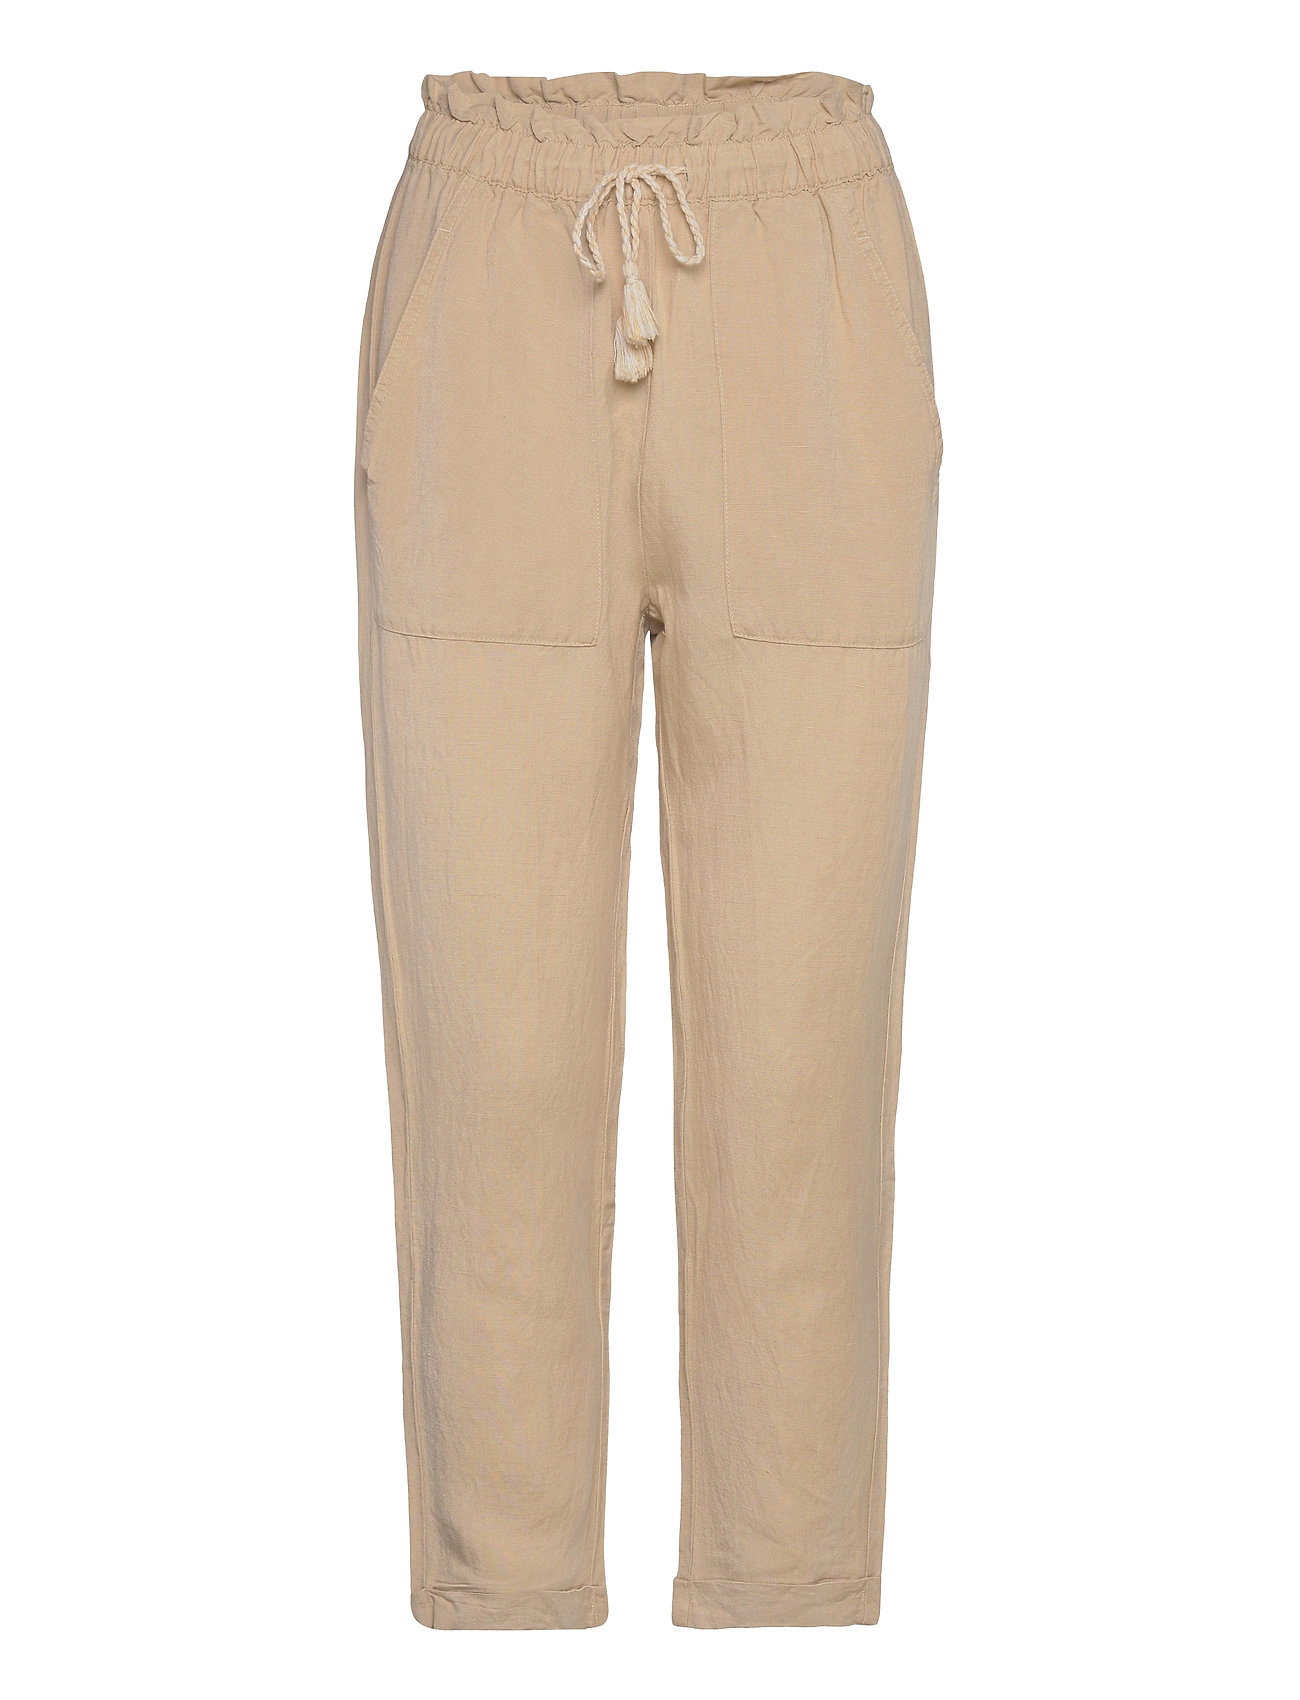 Tom Tailor Loose Fit Pants With Linen (Cream Toffee) - 29.69 € | Boozt.com